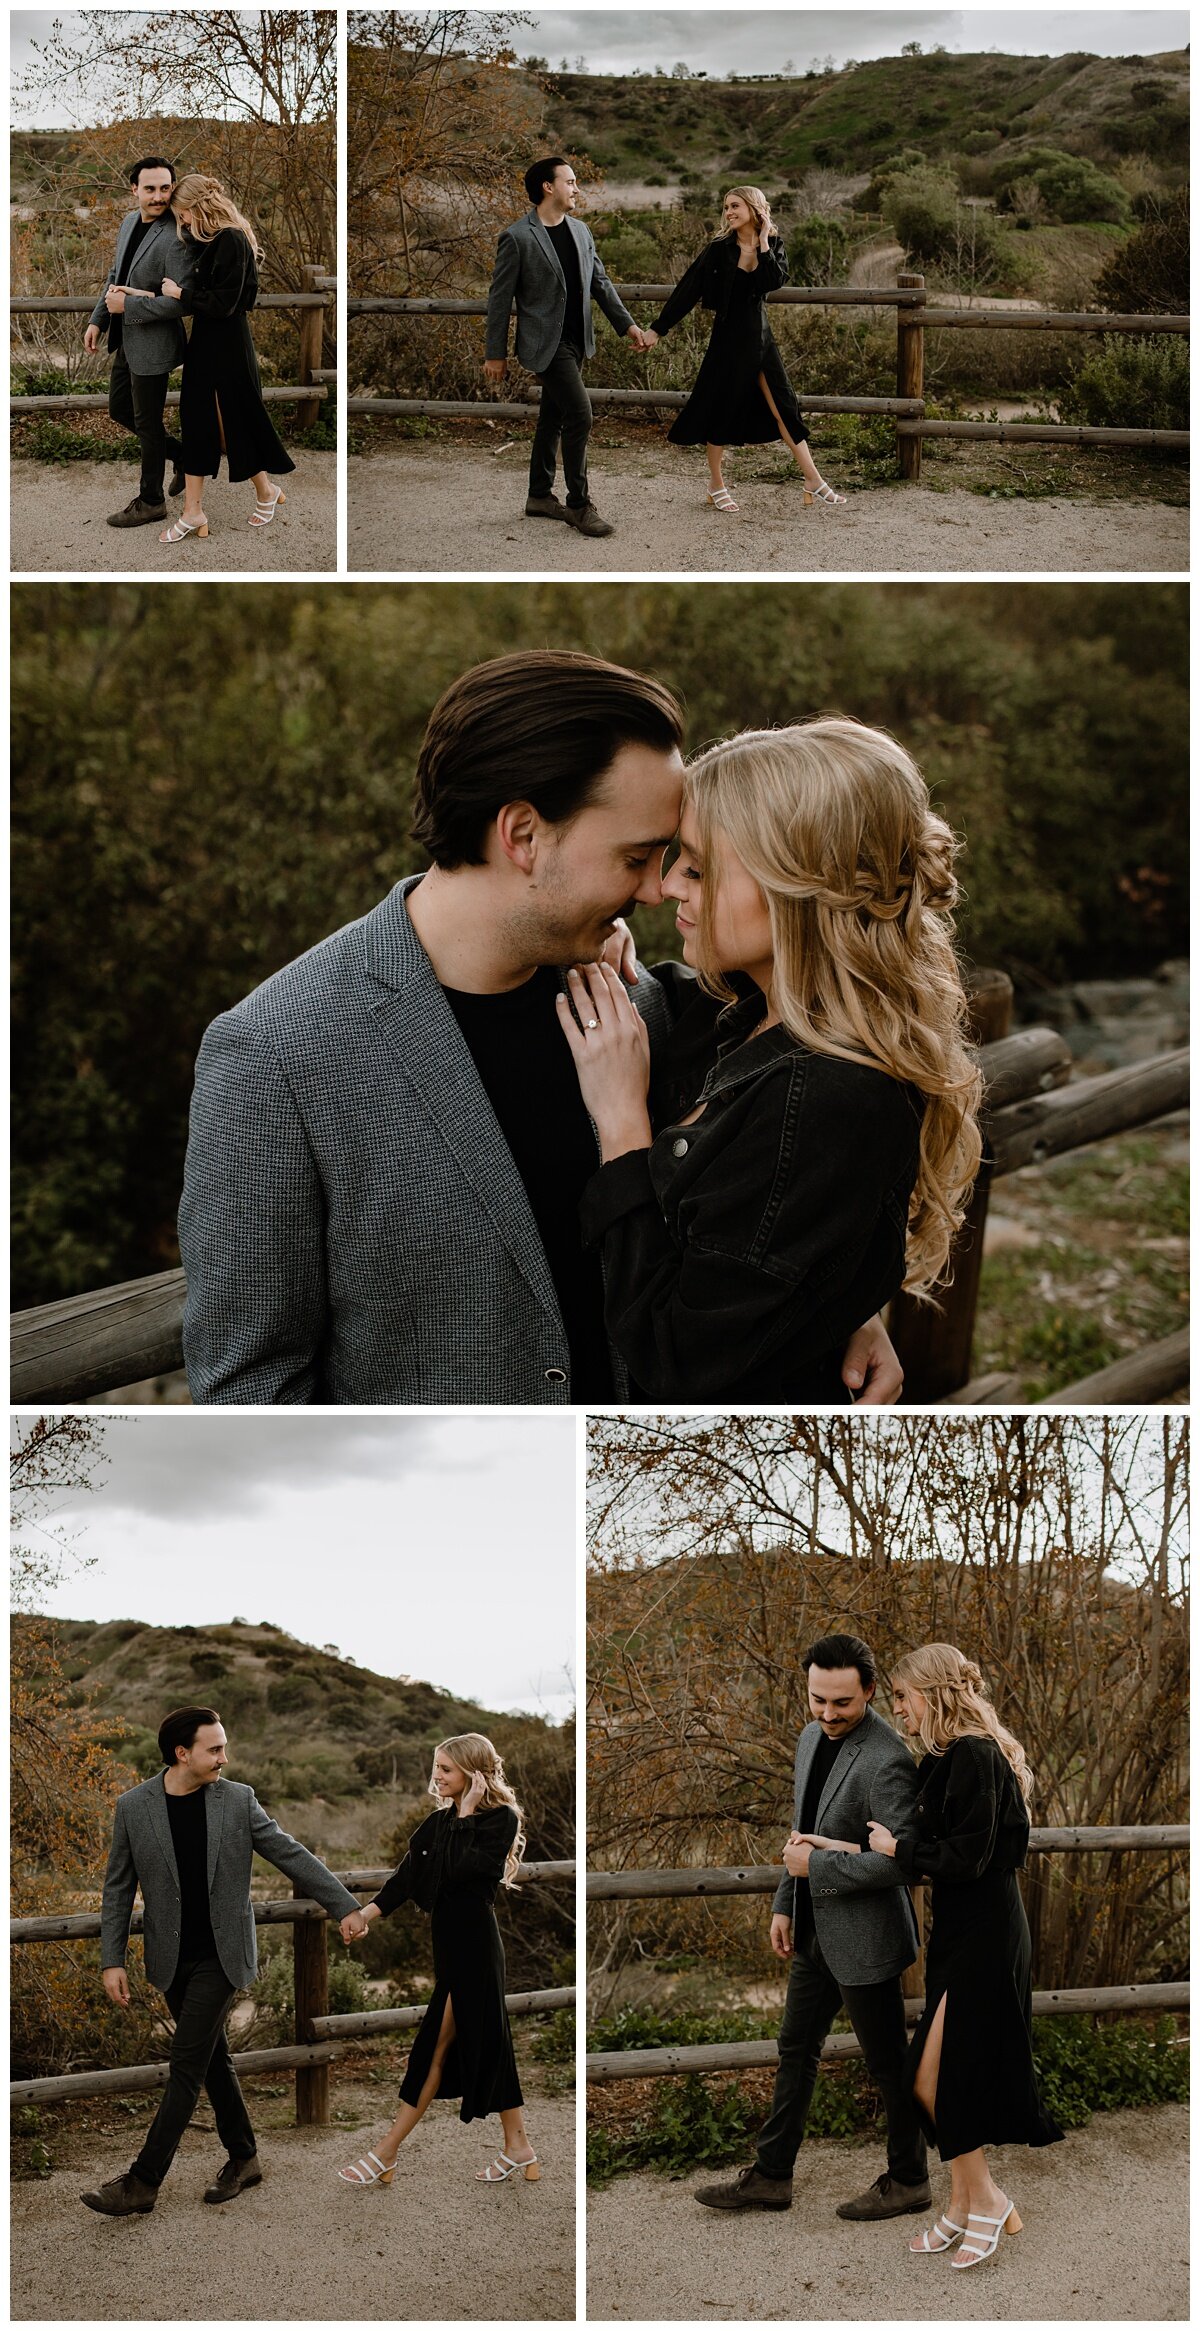 Carbon Canyon Park Orange County - Madeline and Scott Engagement Session - Eve Rox Photography-193_WEB.jpg